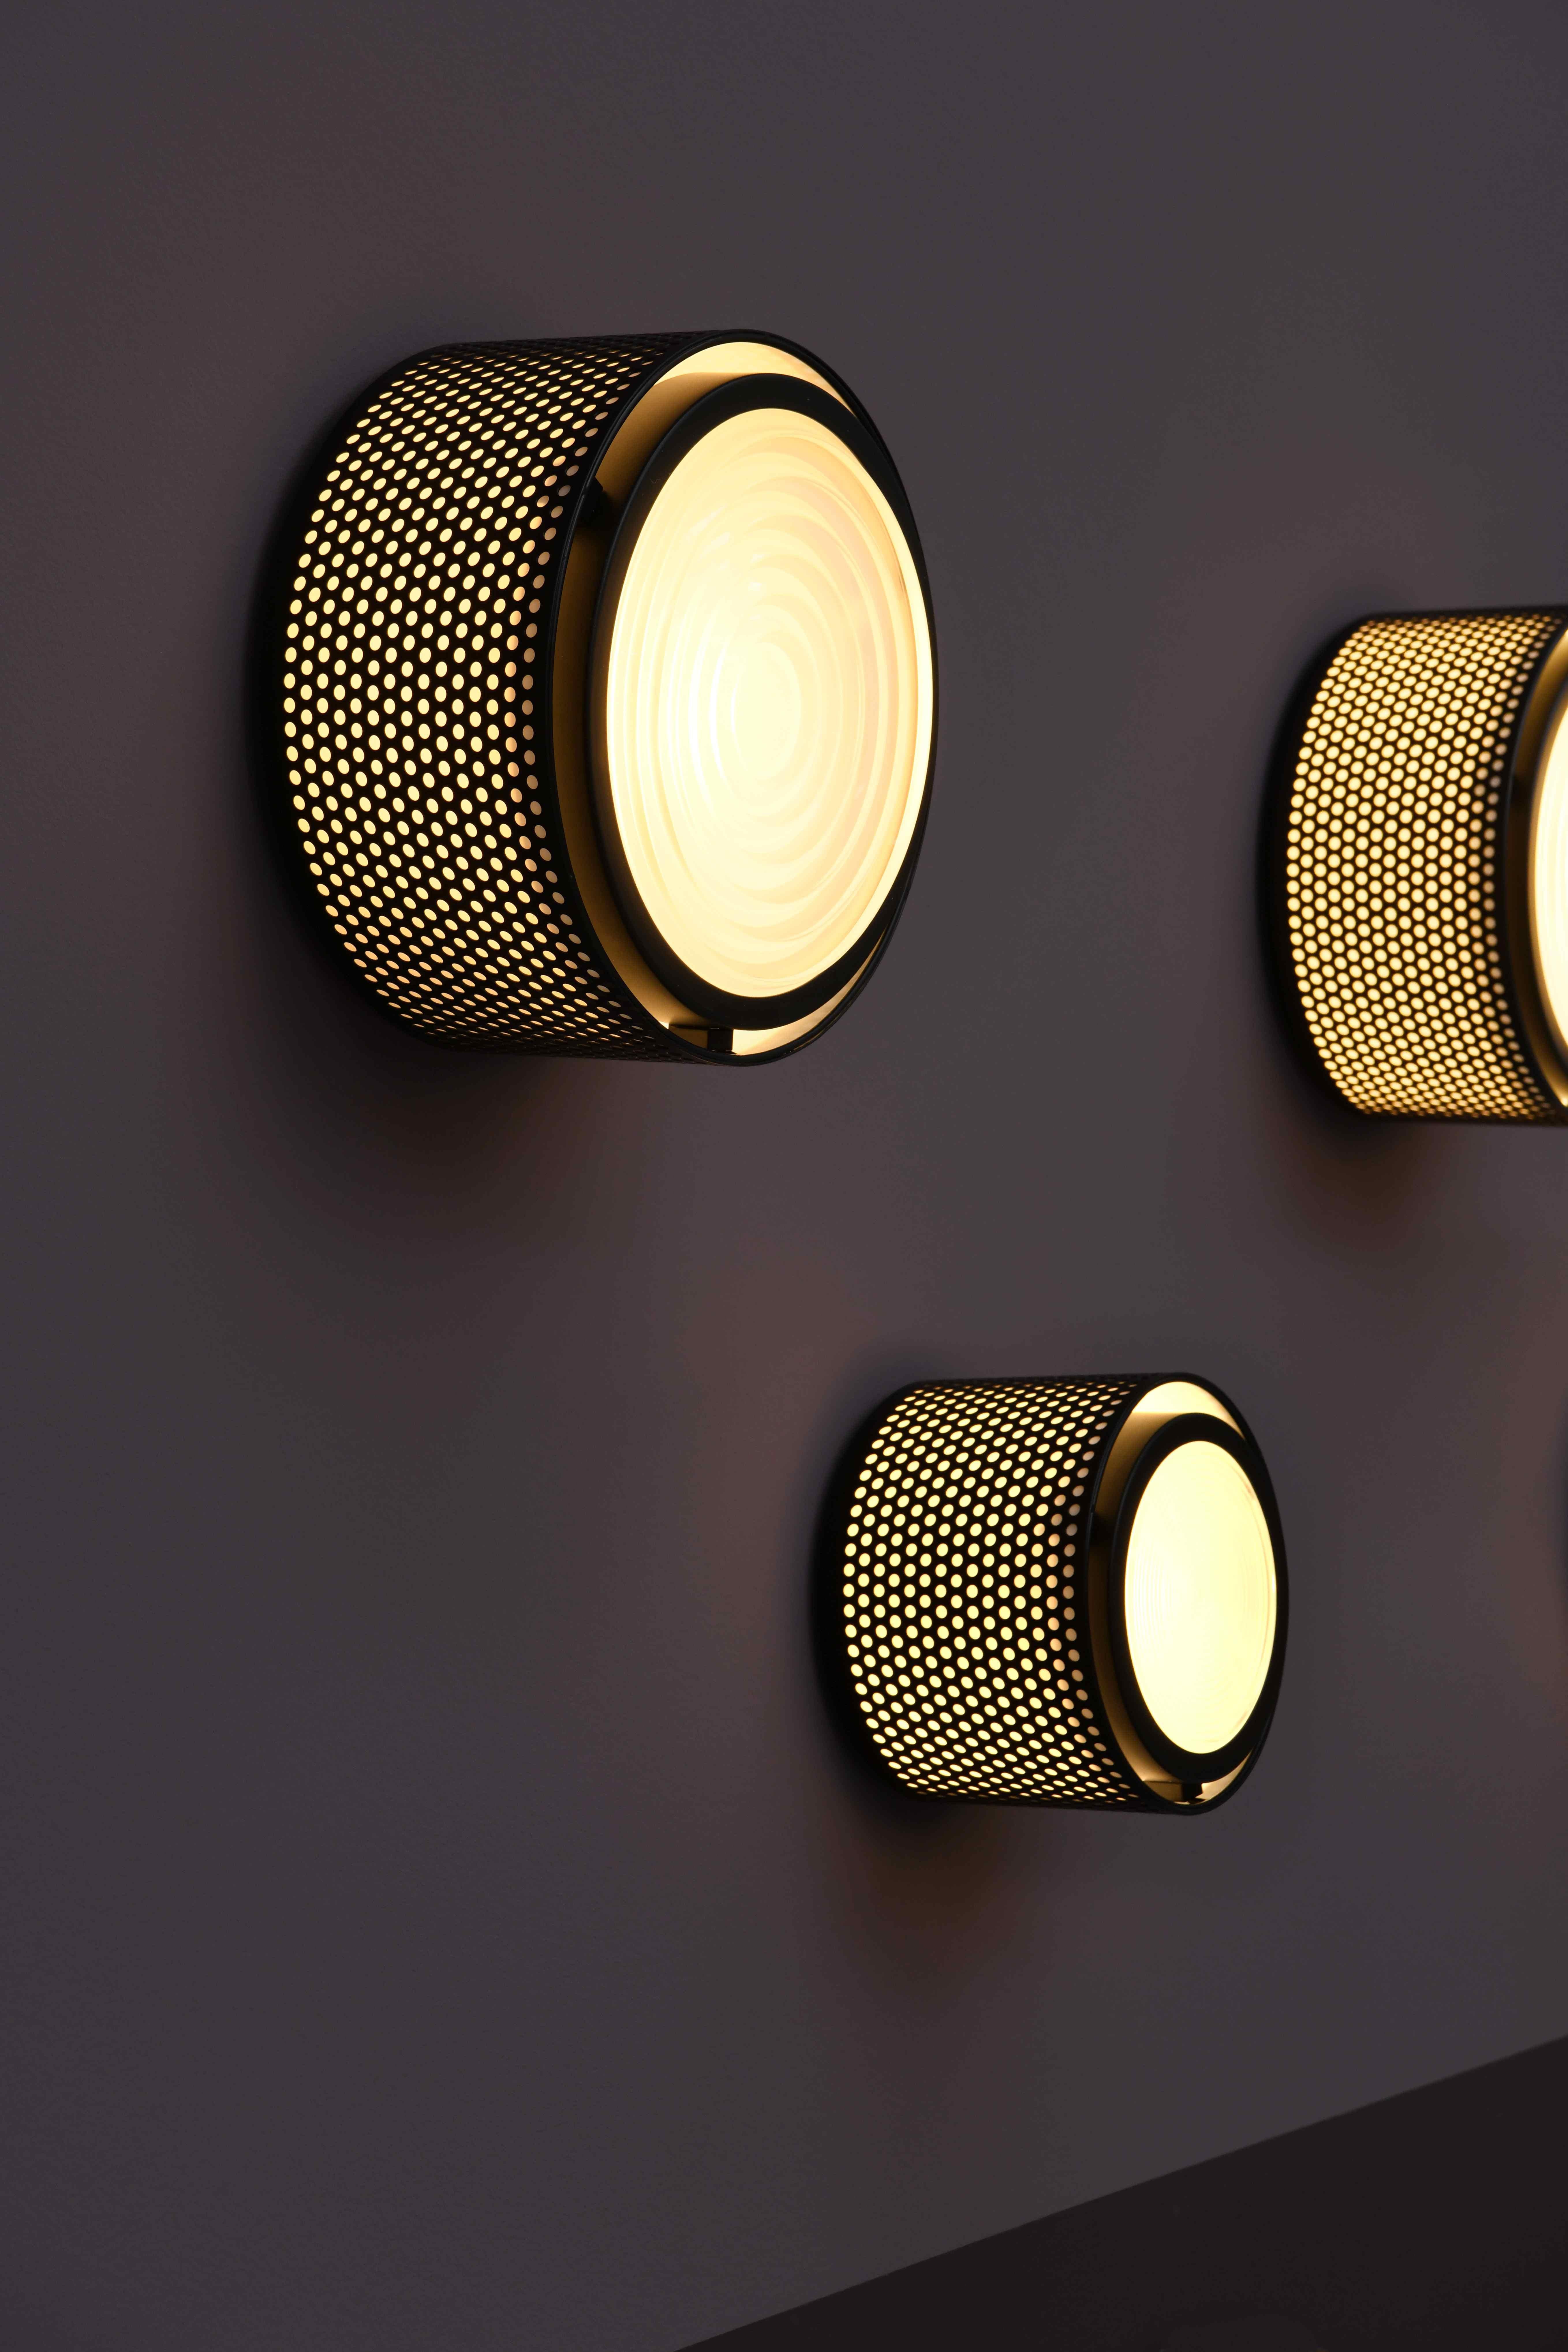 Large Pierre Guariche 'G13' wall or ceiling light for Sammode Studio in black. 

Originally designed by Pierre Guariche, this iconic lamp is newly produced in an authorized re-edition by Sammode Studio in France embracing many of the same